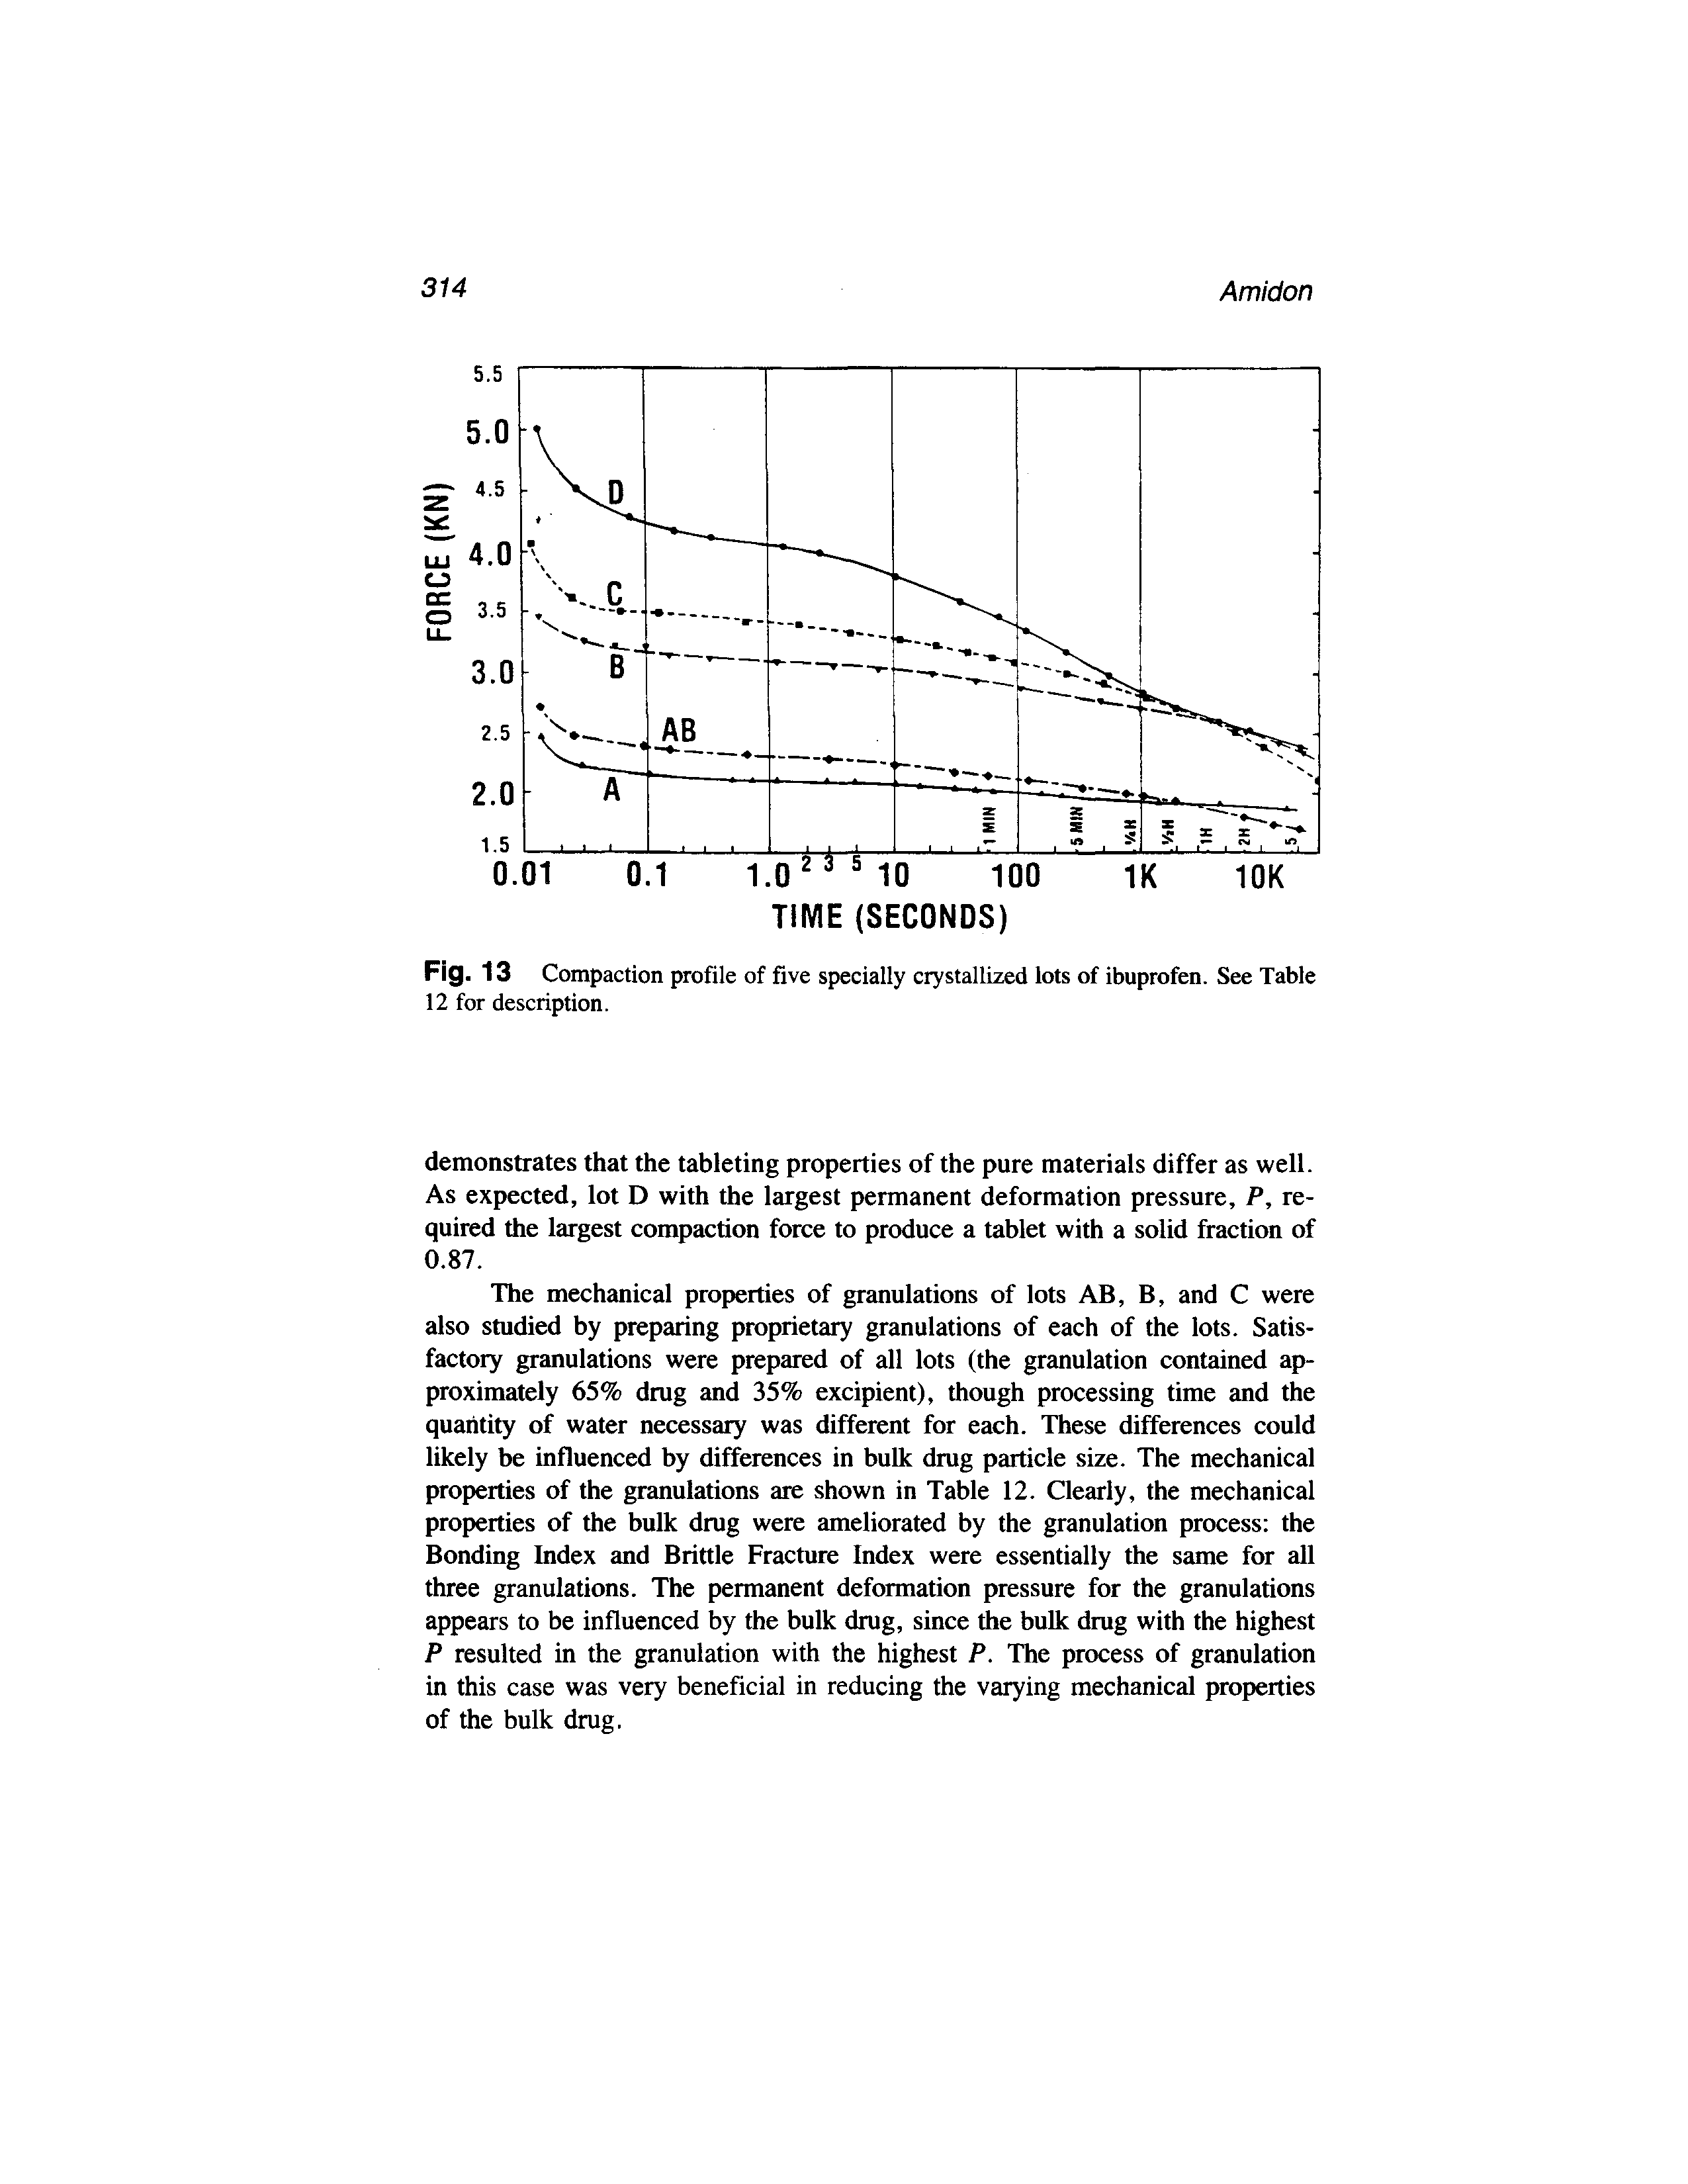 Fig. 13 Compaction profile of five specially crystallized lots of ibuprofen. See Table 12 for description.